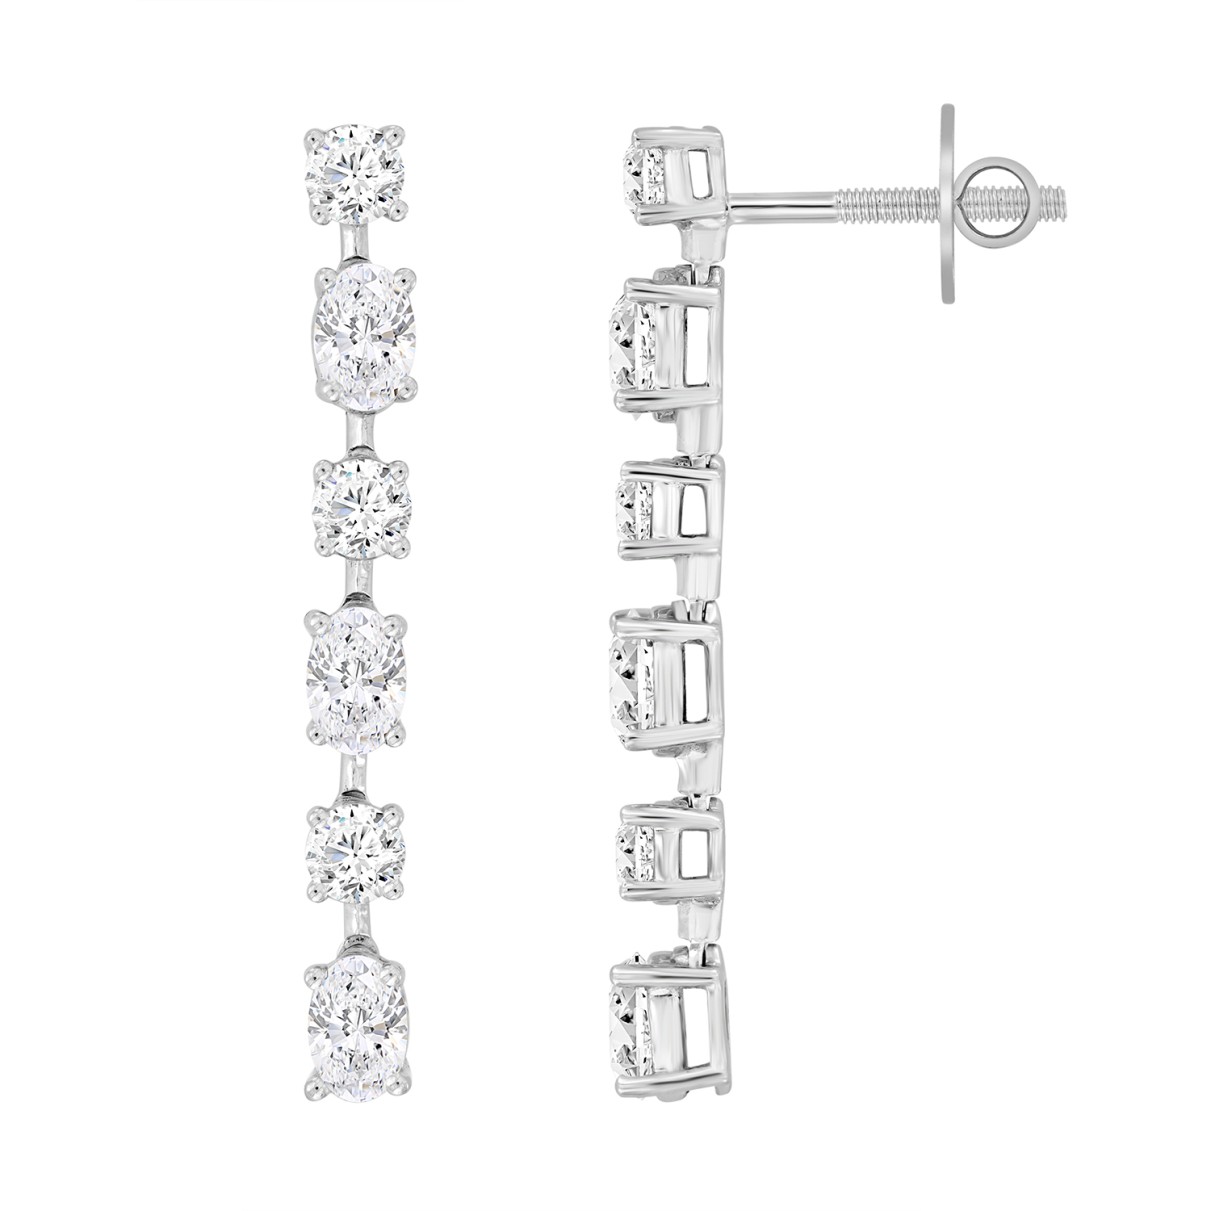 LADIES LINEAR EARRINGS 4 1/2CT OVAL/ROUND DIAMOND 14K WHITE GOLD